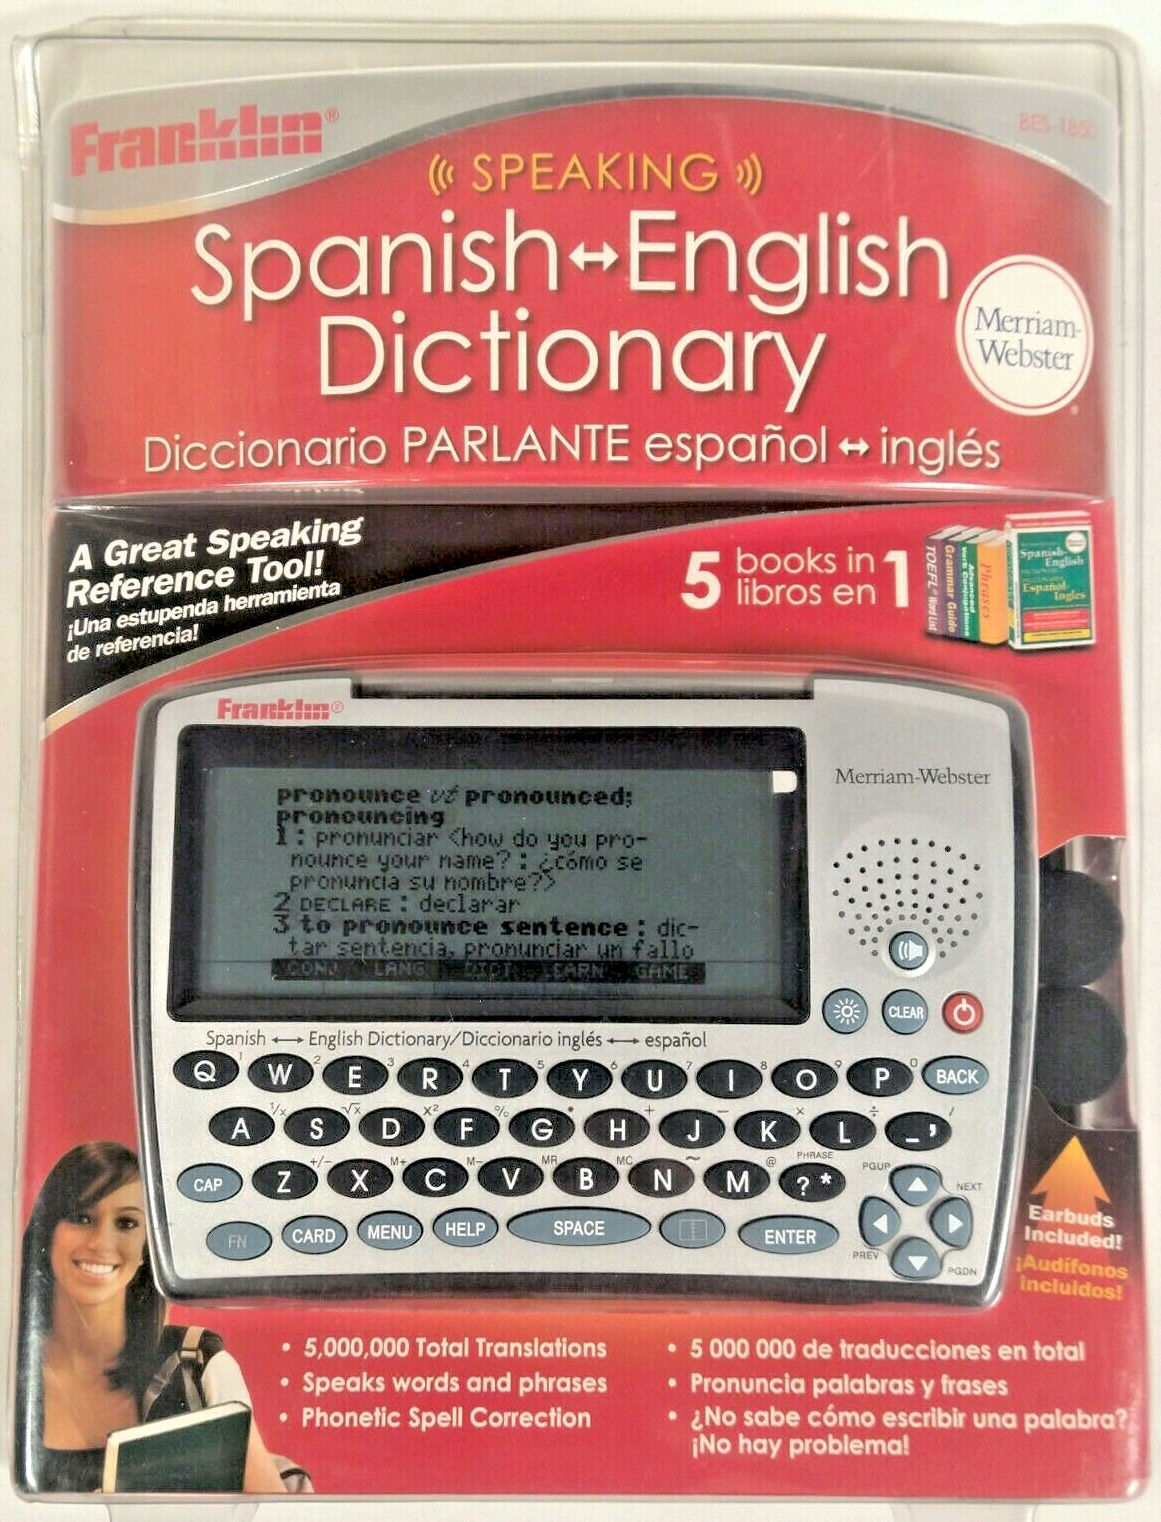 Franklin MWD-440 Bookman Electronic Dictionary & Thesaurus Handheld Dictionary 